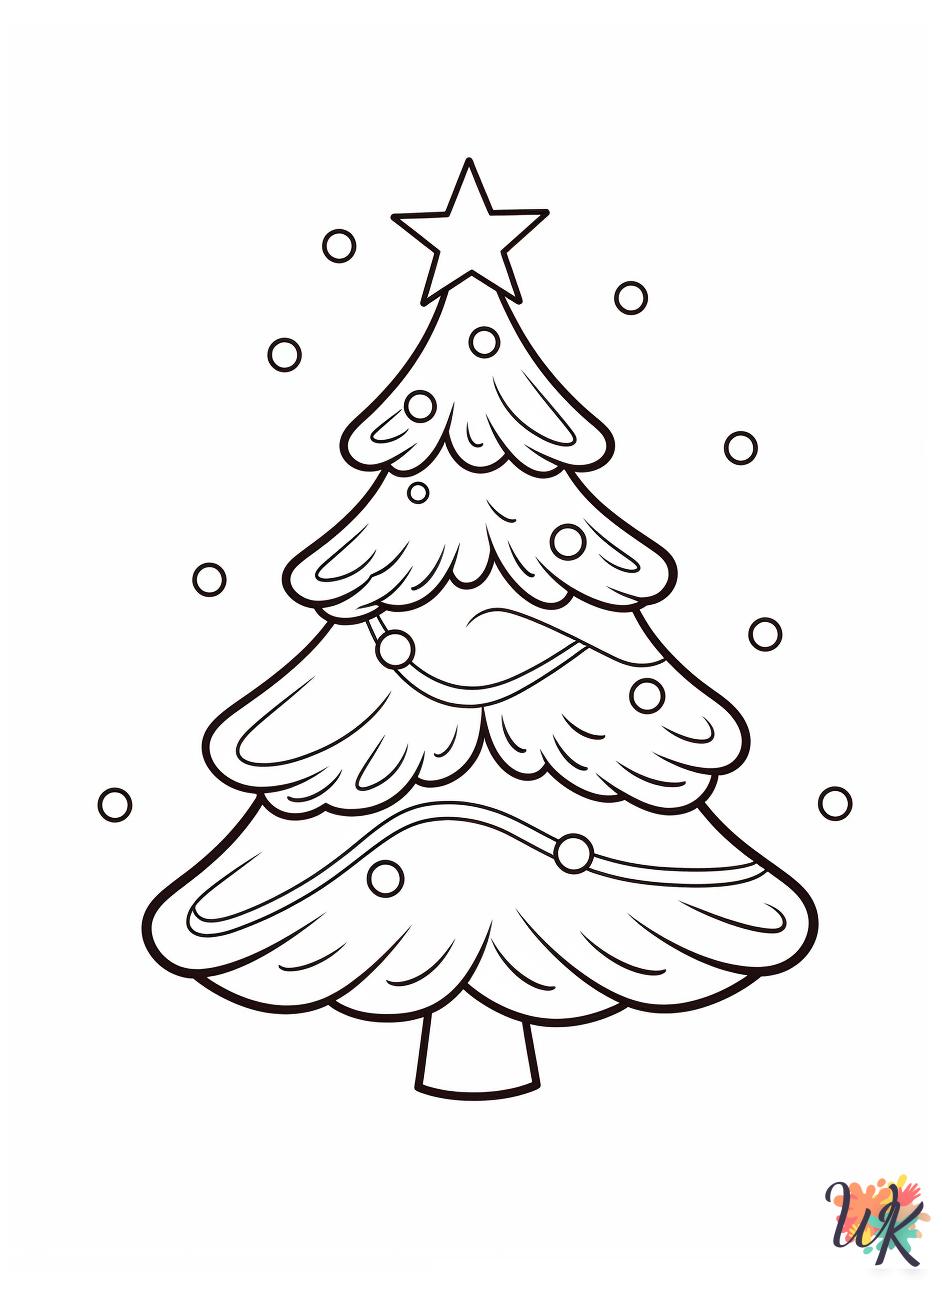 detailed December coloring pages for adults